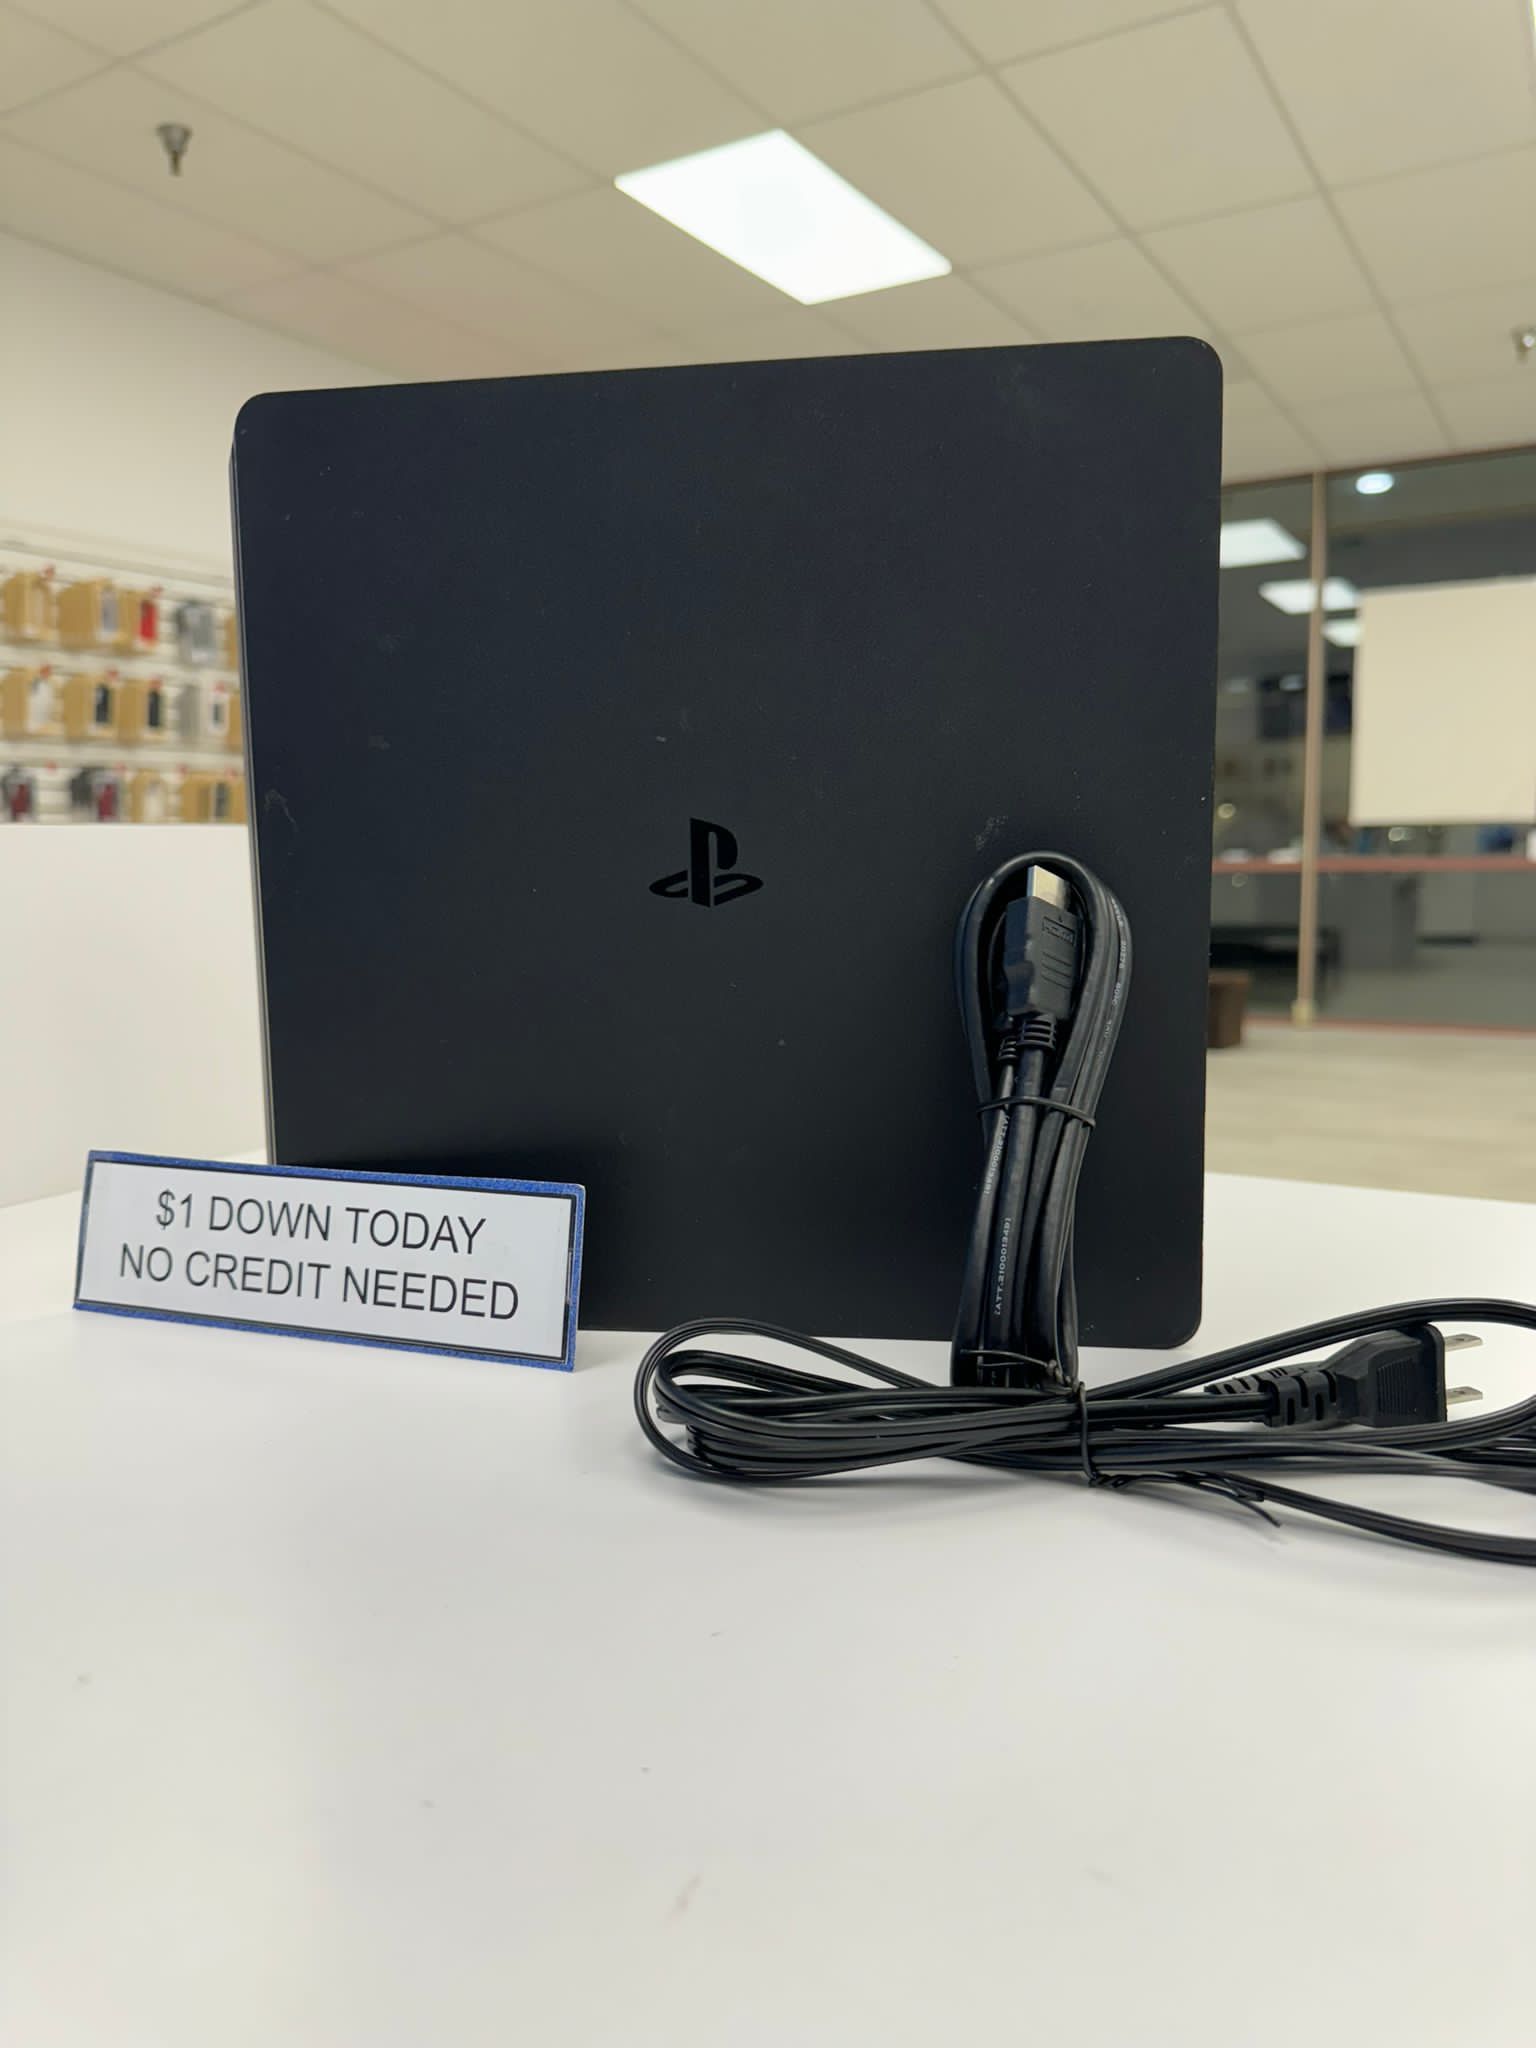 Sony PlayStation 4 PS4 Slim Gaming Console - Pay $1 Today to Take it Home and Pay the Rest Later!